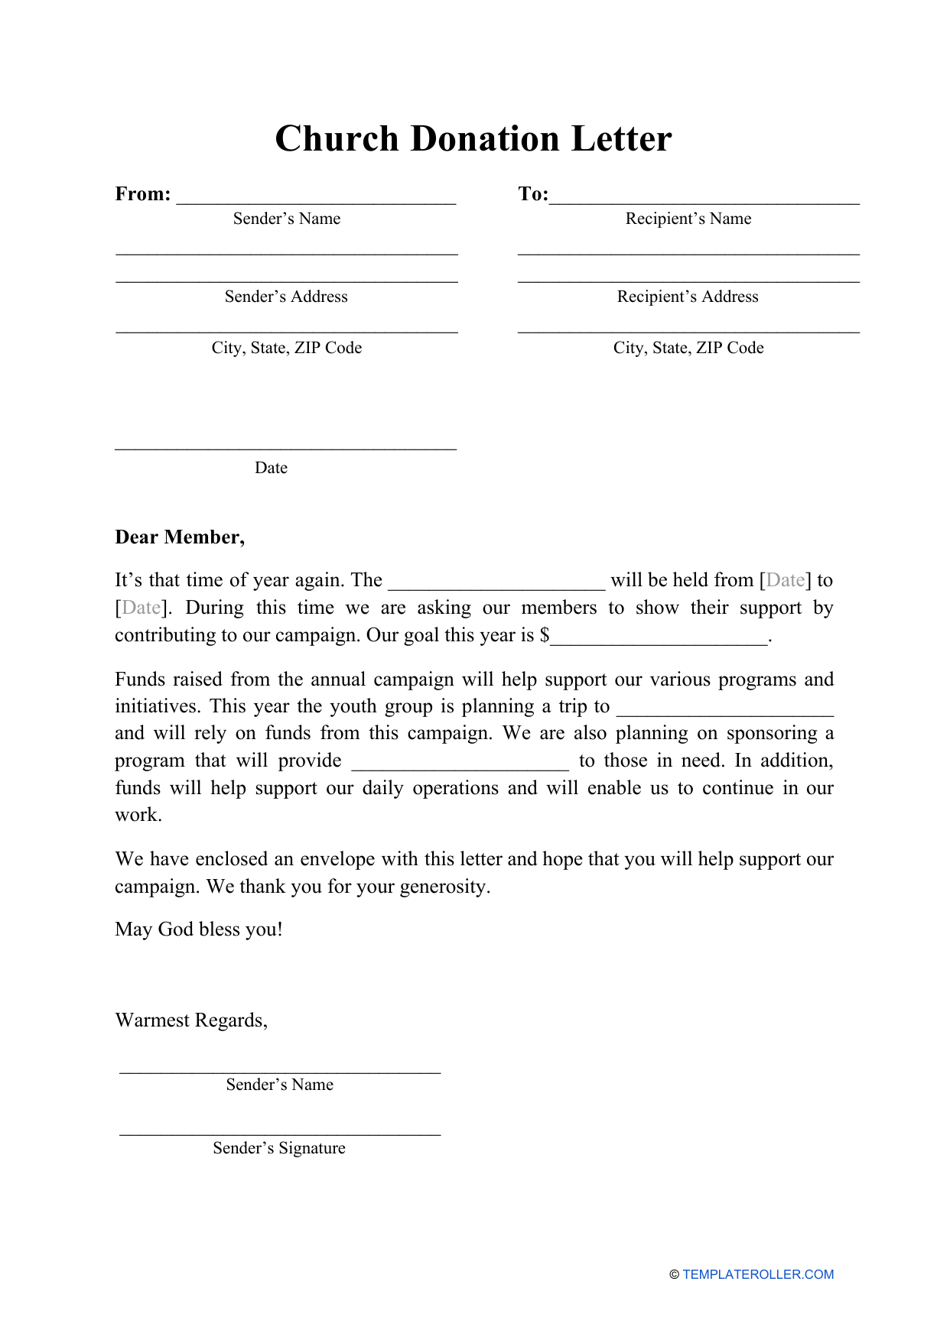 Church Donation Letter Template – A professionally designed and customizable letter template for churches seeking financial support